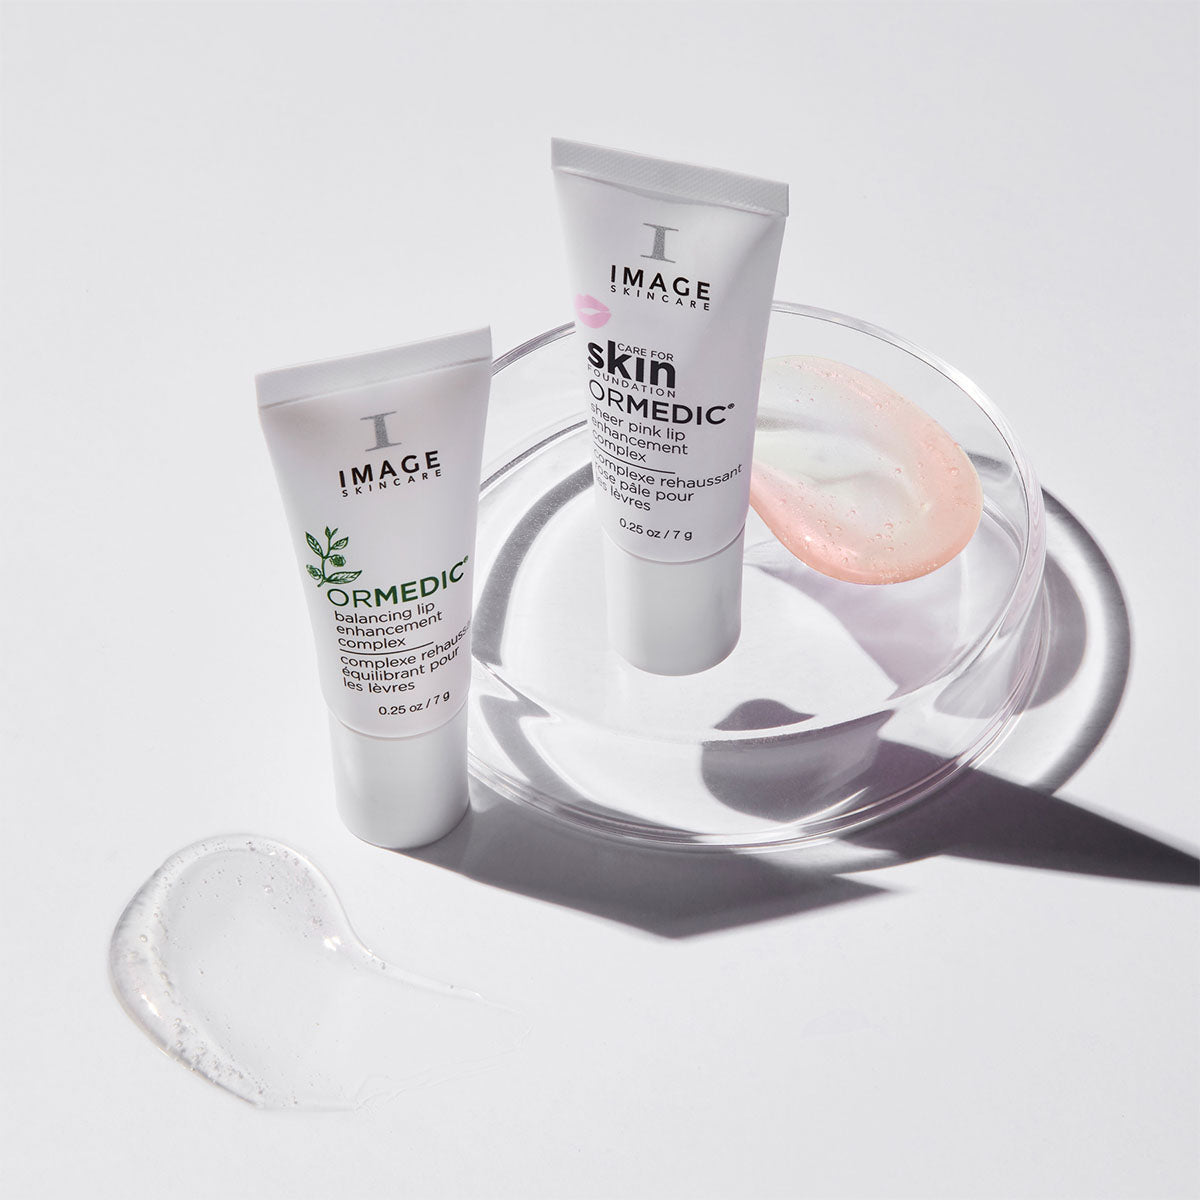 Image Skincare has two ORMEDIC balancing lip treatments one is clear and one is tinted pink.